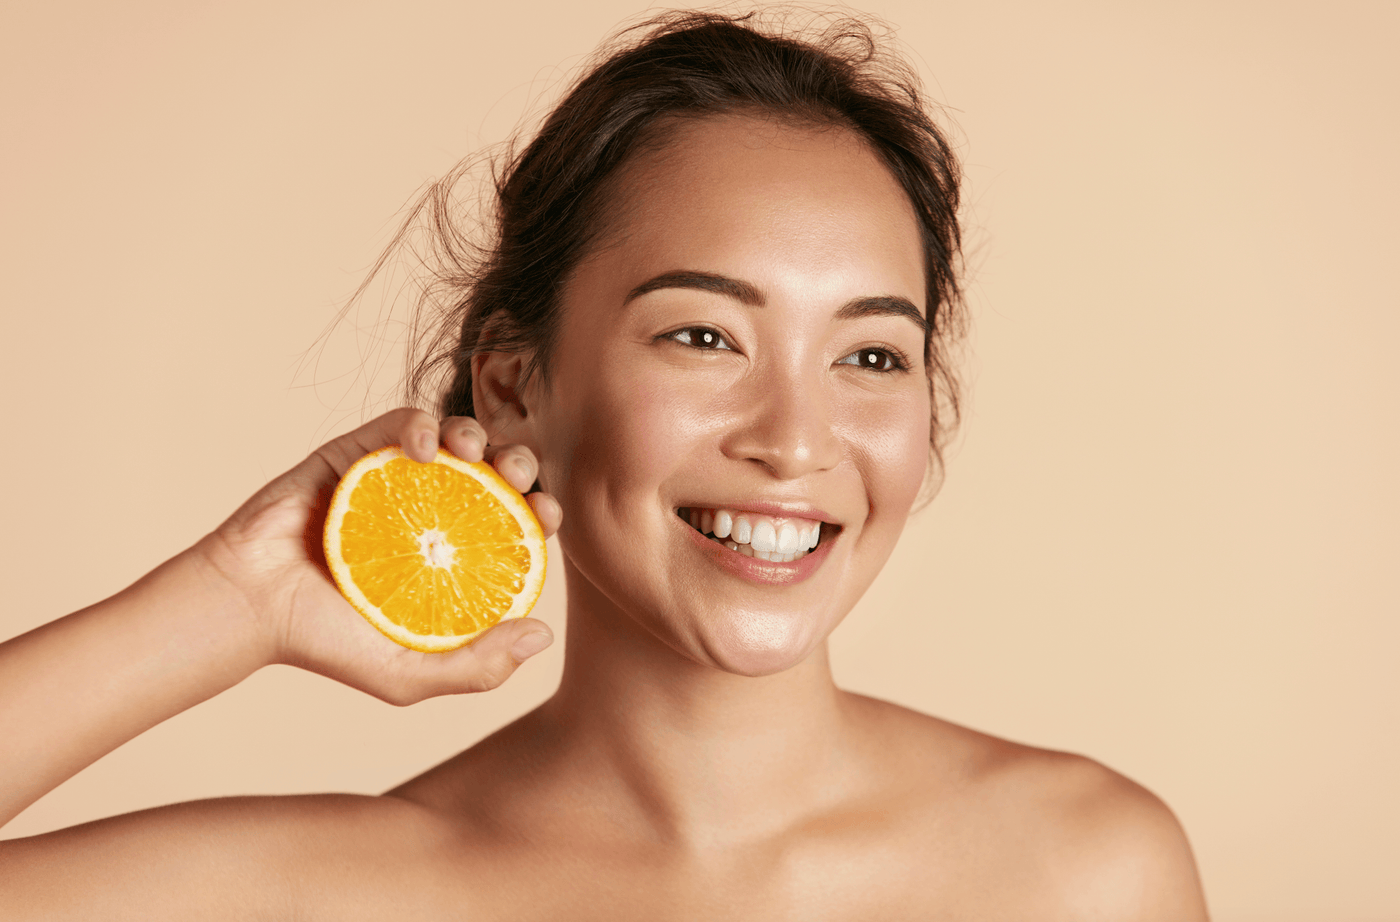 Vitamin C: The secret ingredient to know for glowing, healthy skin